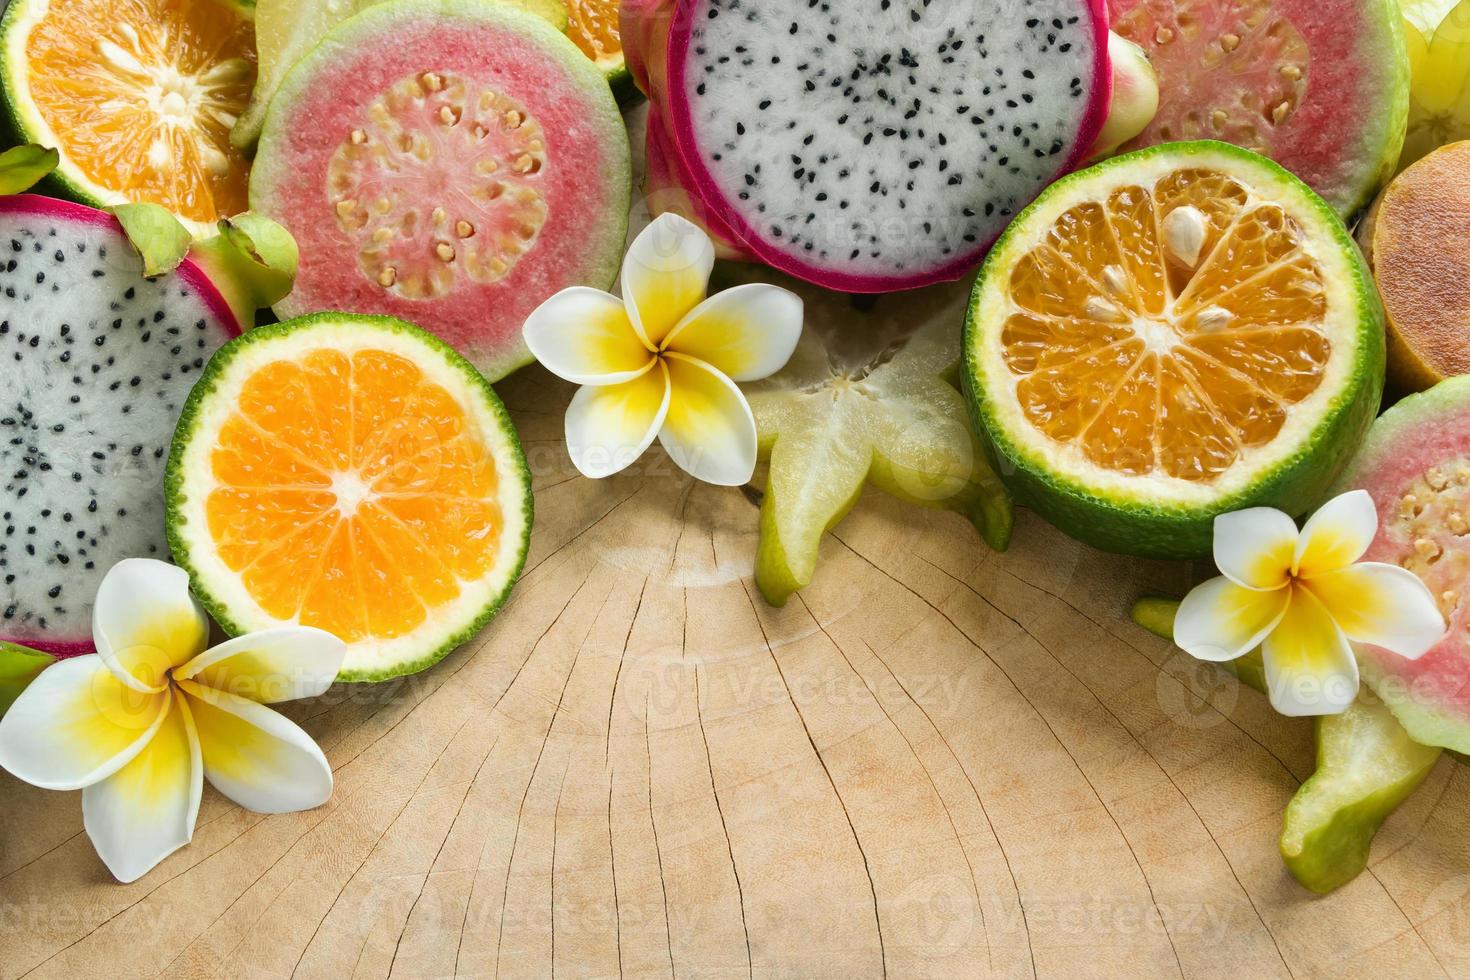 Bright colorful tropical fruits - tangerine, guava, dragon fruit, star fruit, sapodilla with flowers of plumeria on the wooden background. photo